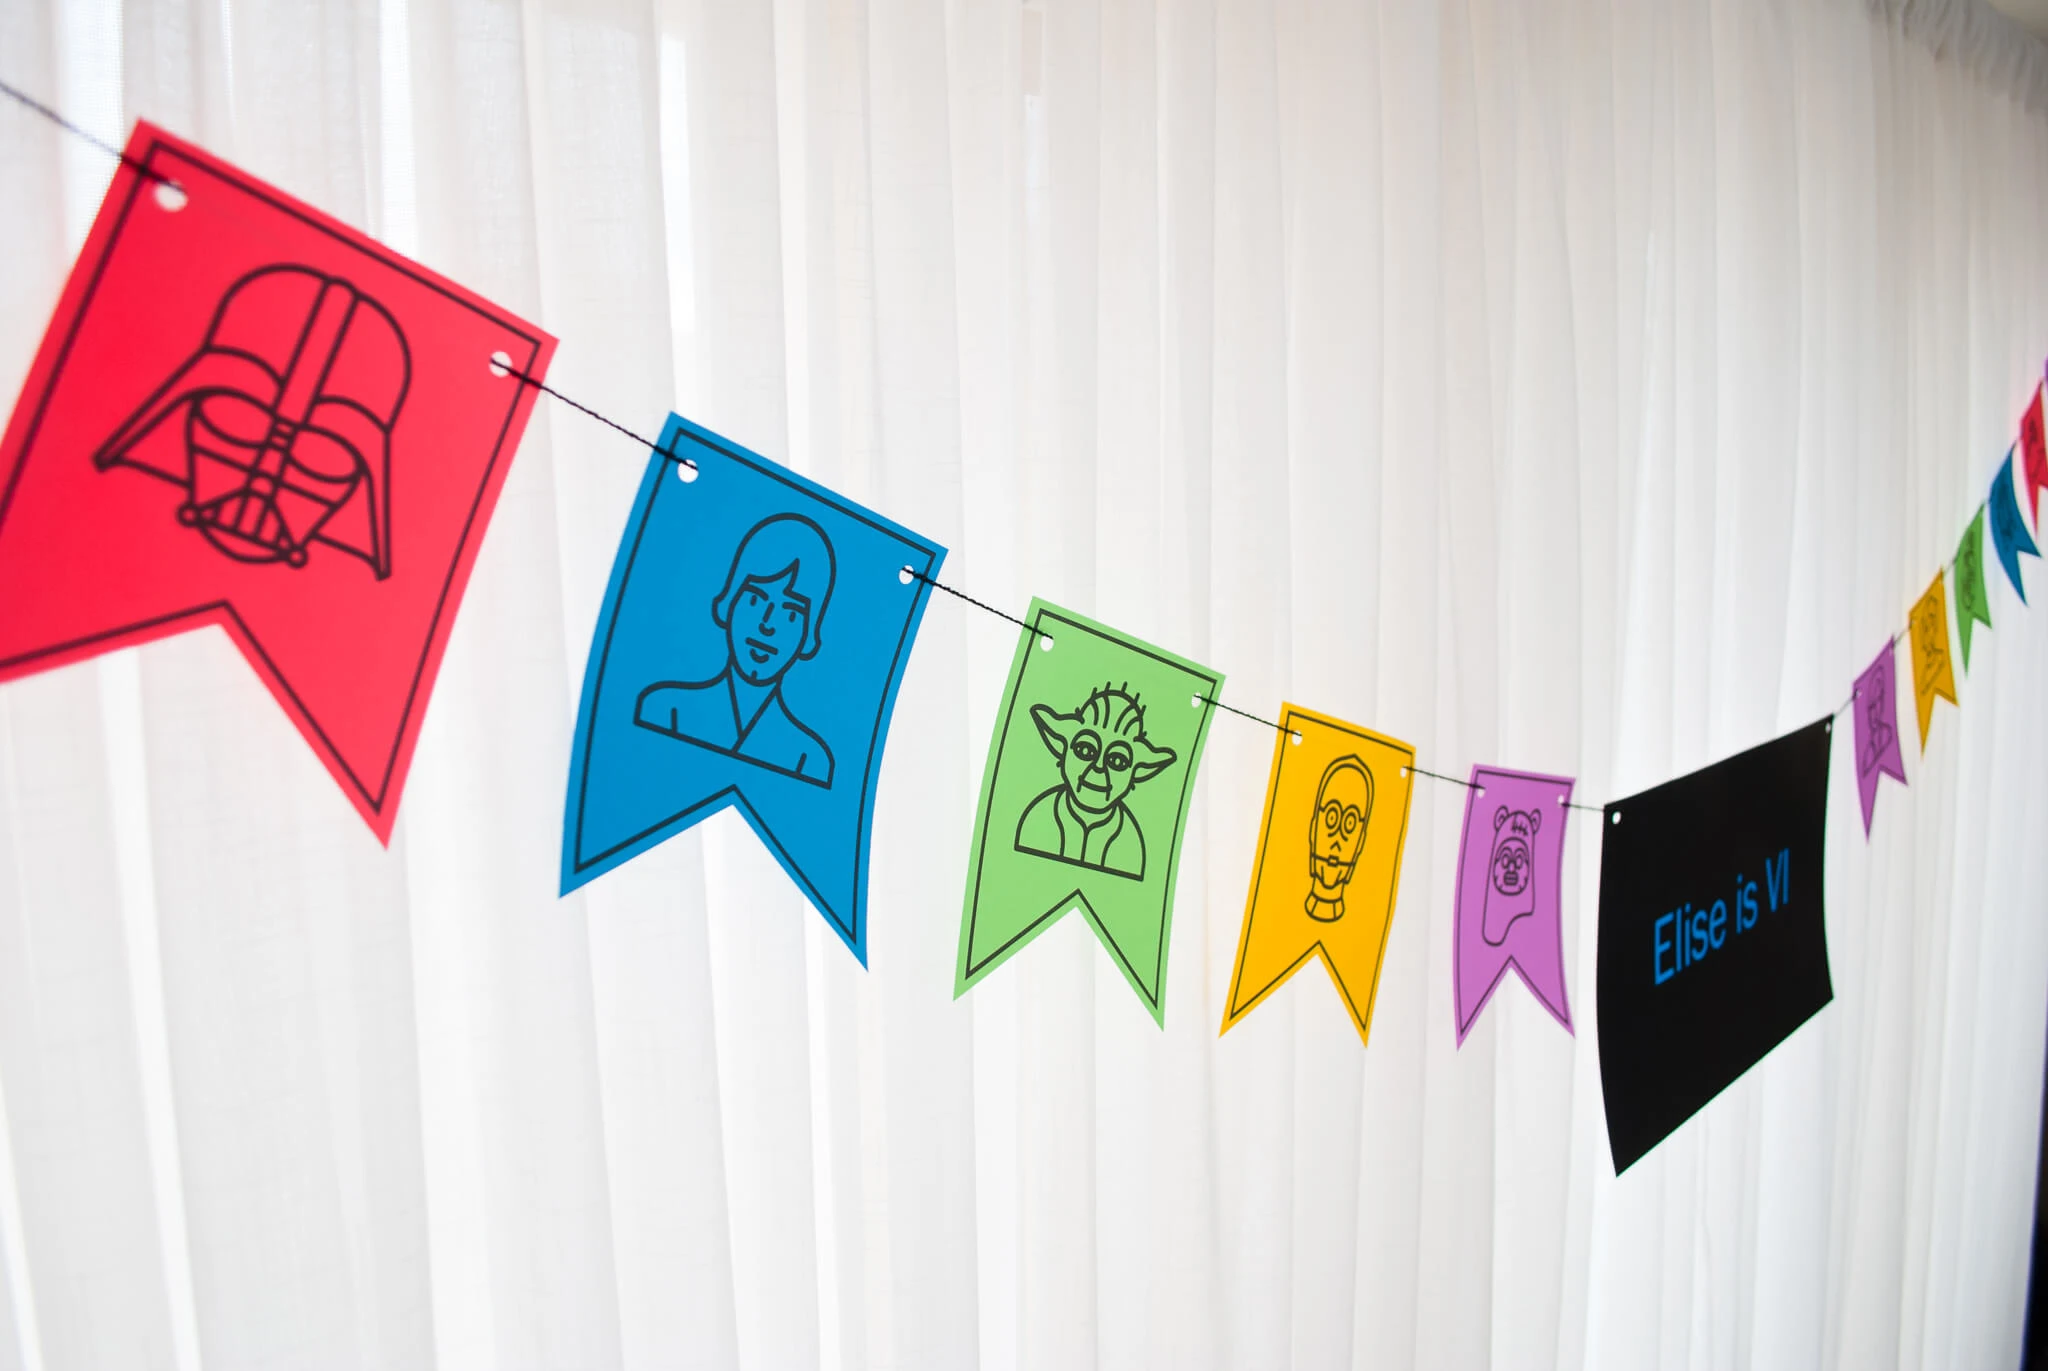 diy party banners